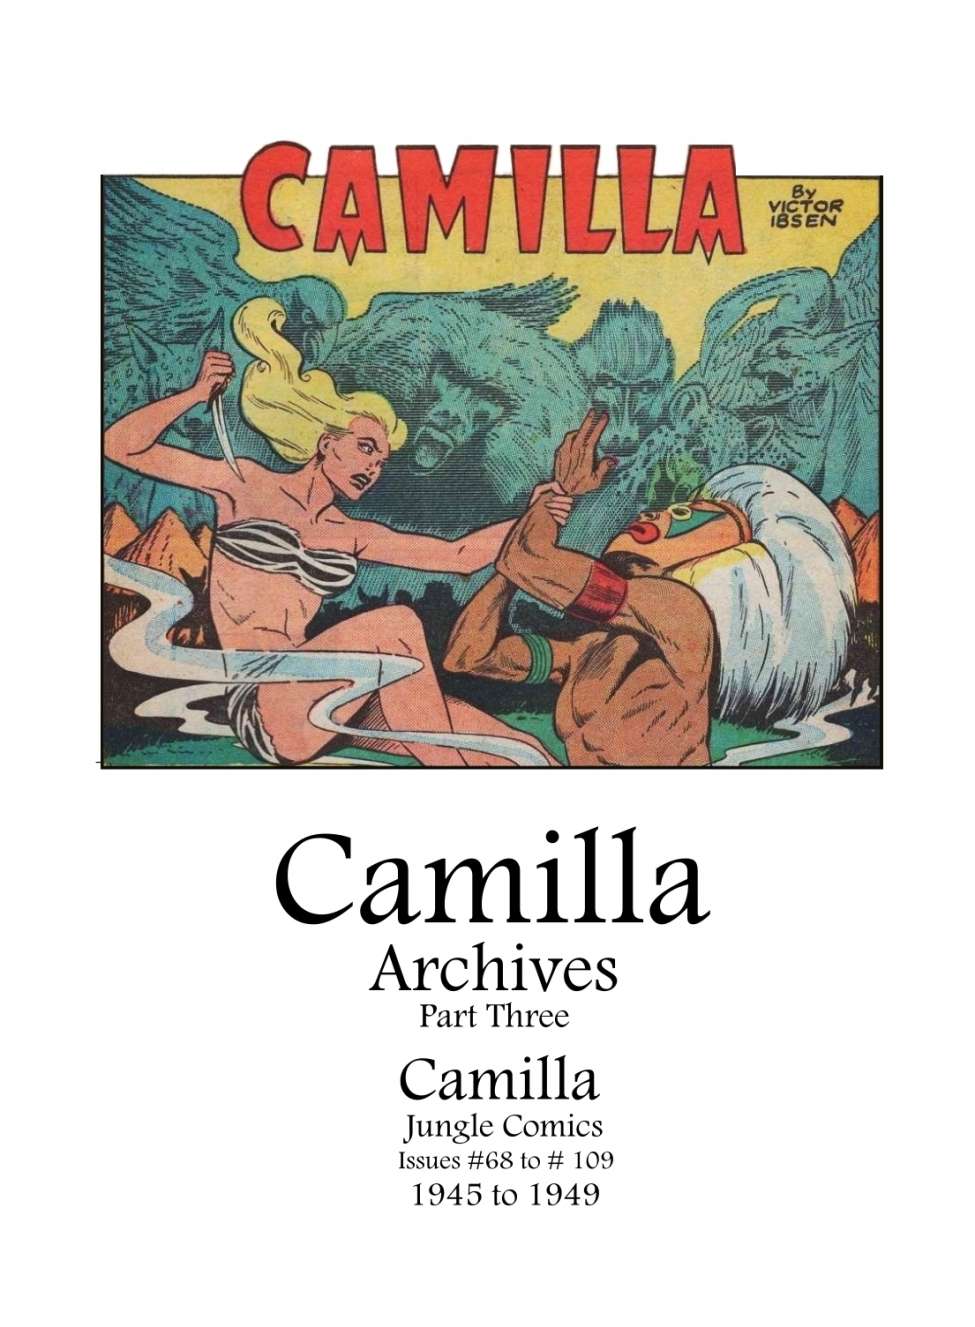 Book Cover For Camilla Archives Part 3 (1945-1949)